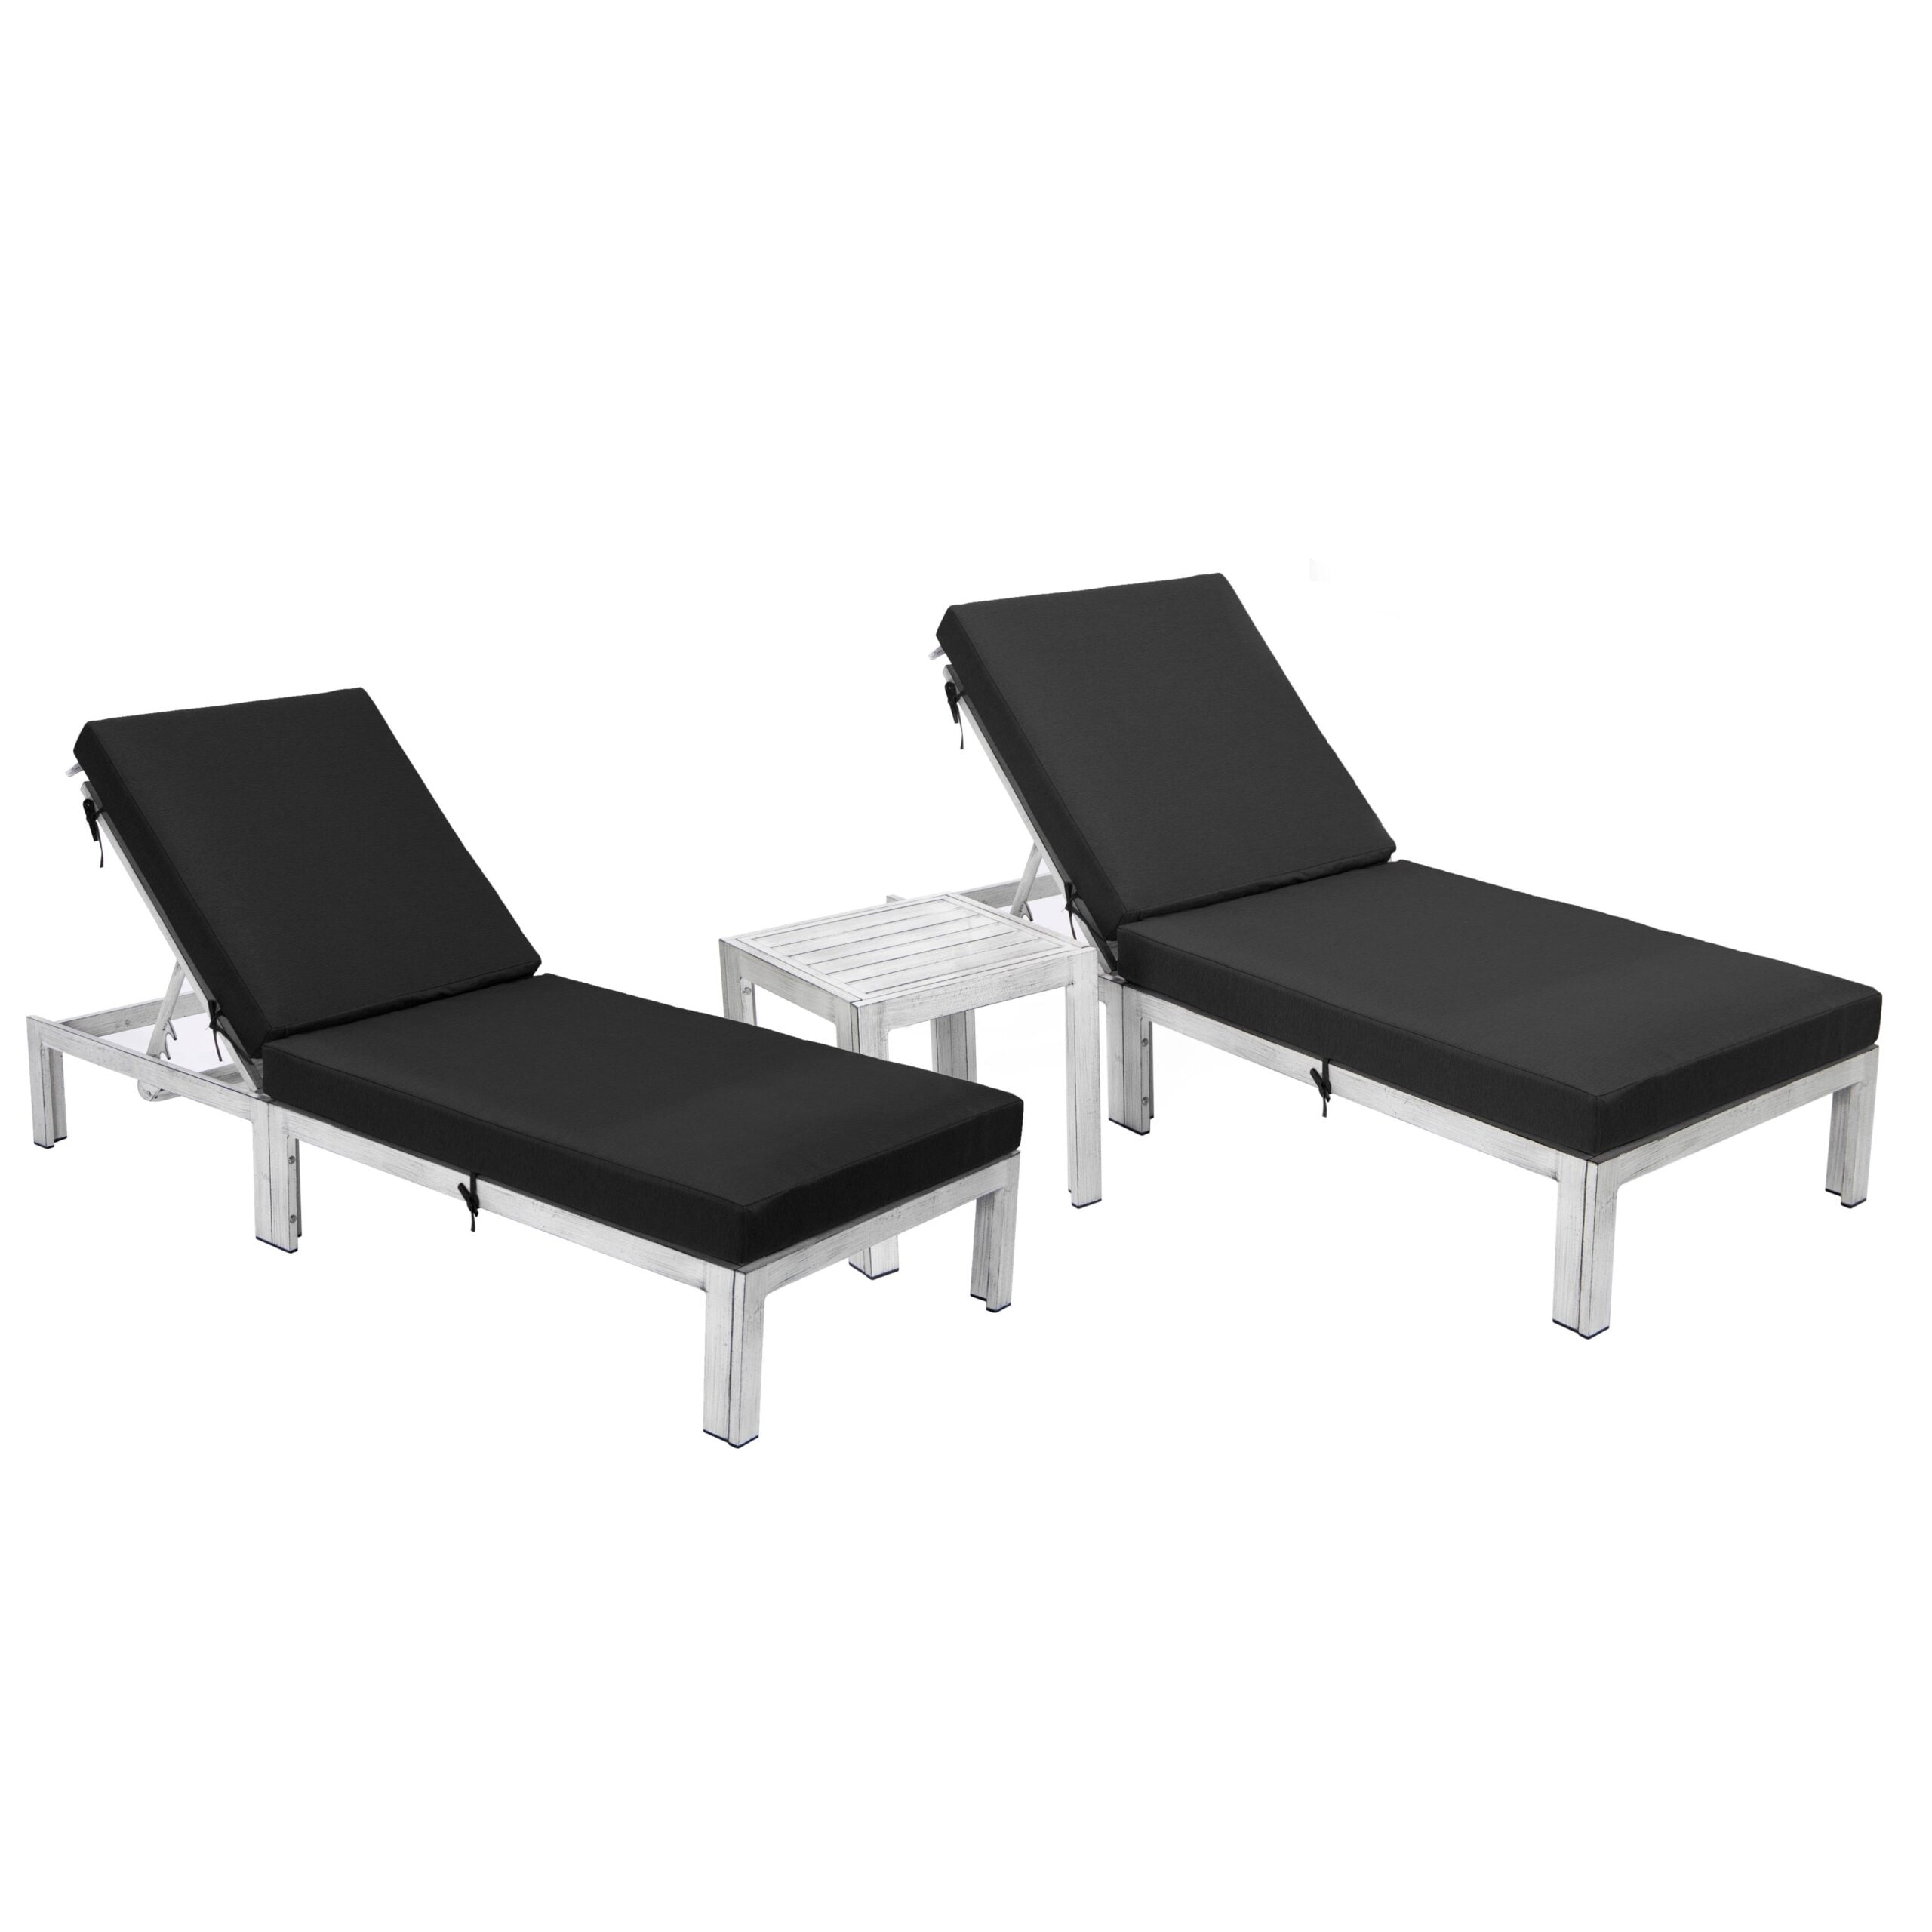 Leisuremod Chelsea Grey Chaise Lounge Chair Set Of 2 With Side Table